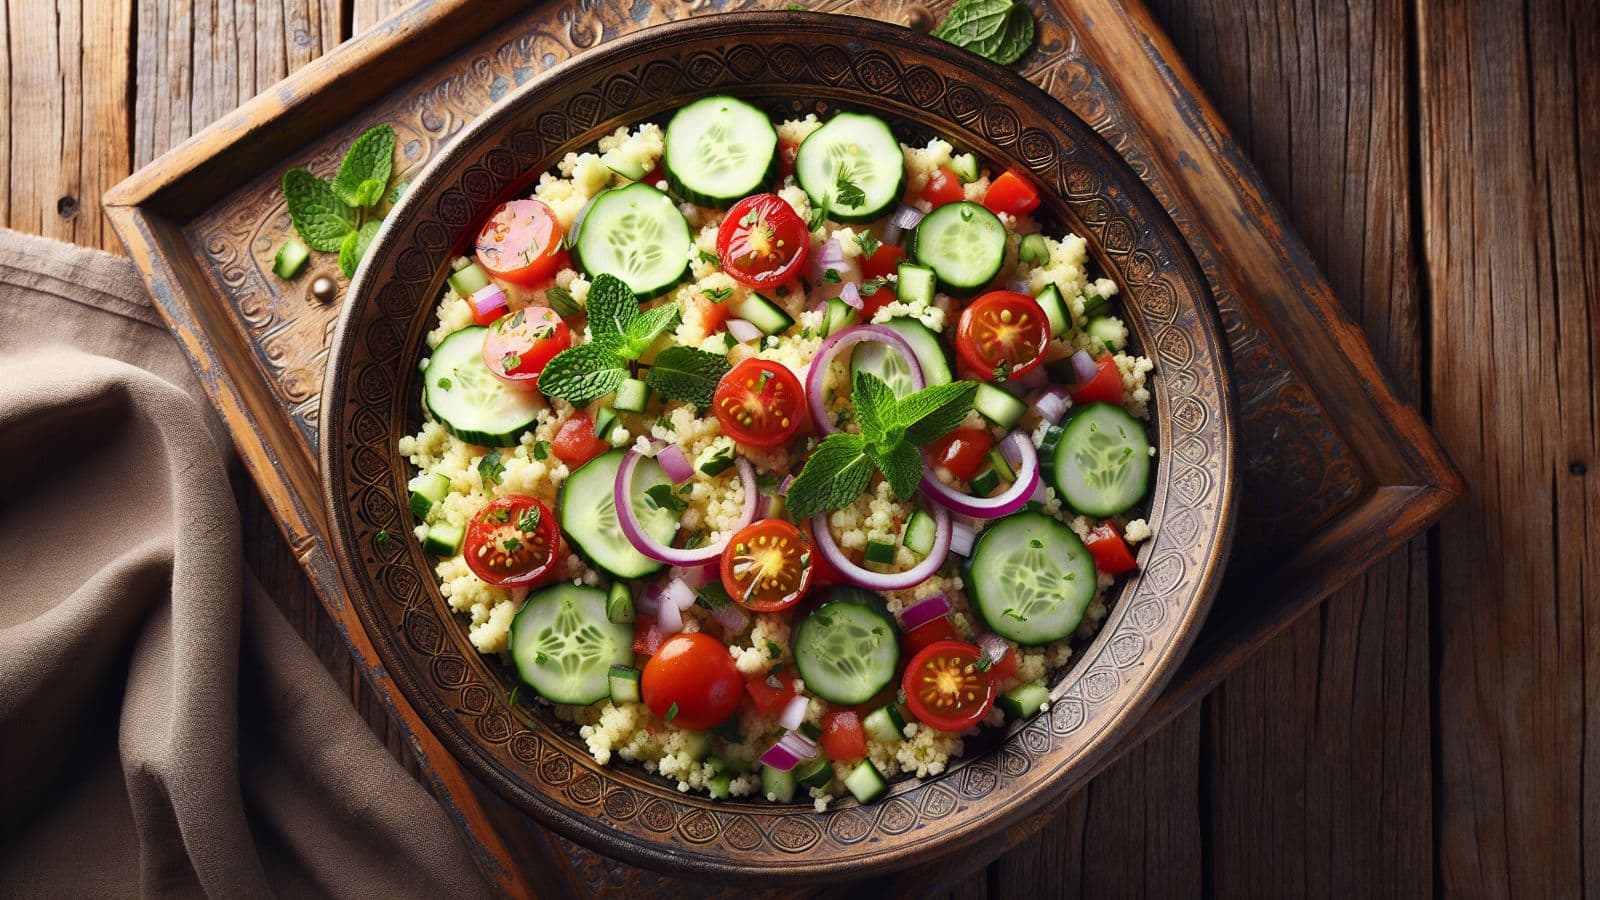 Recipe: Health freaks will love this Moroccan couscous salad